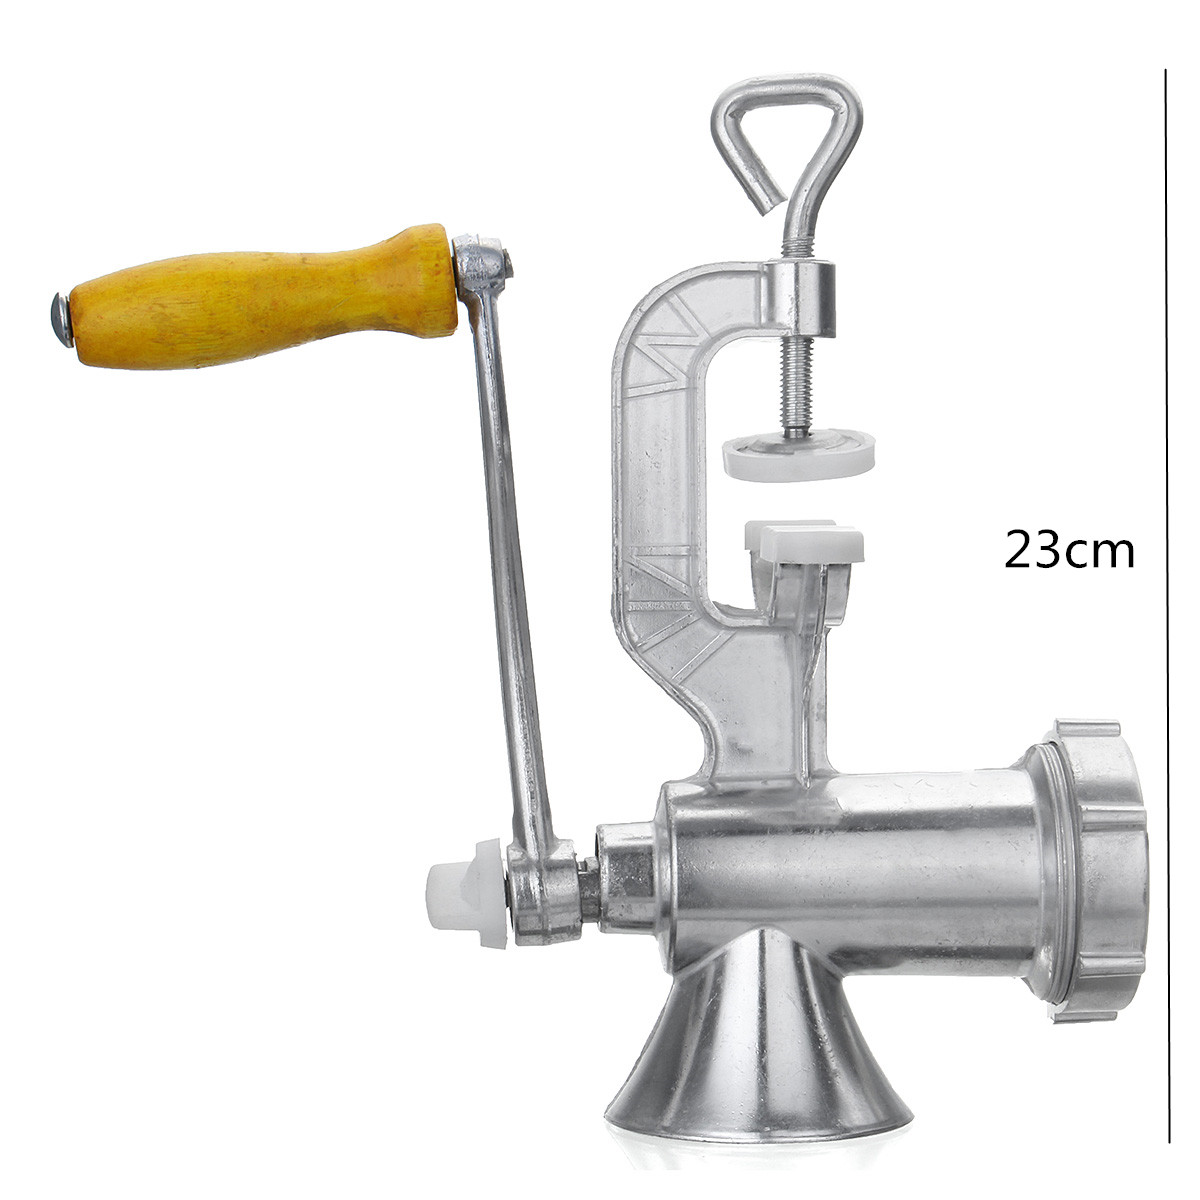 Aluminum-Alloy-Manual-Multifunction-Meat-Grinder-Mincer-EnemaTable-Kitchen-Home-Meat-Chopper-1327924